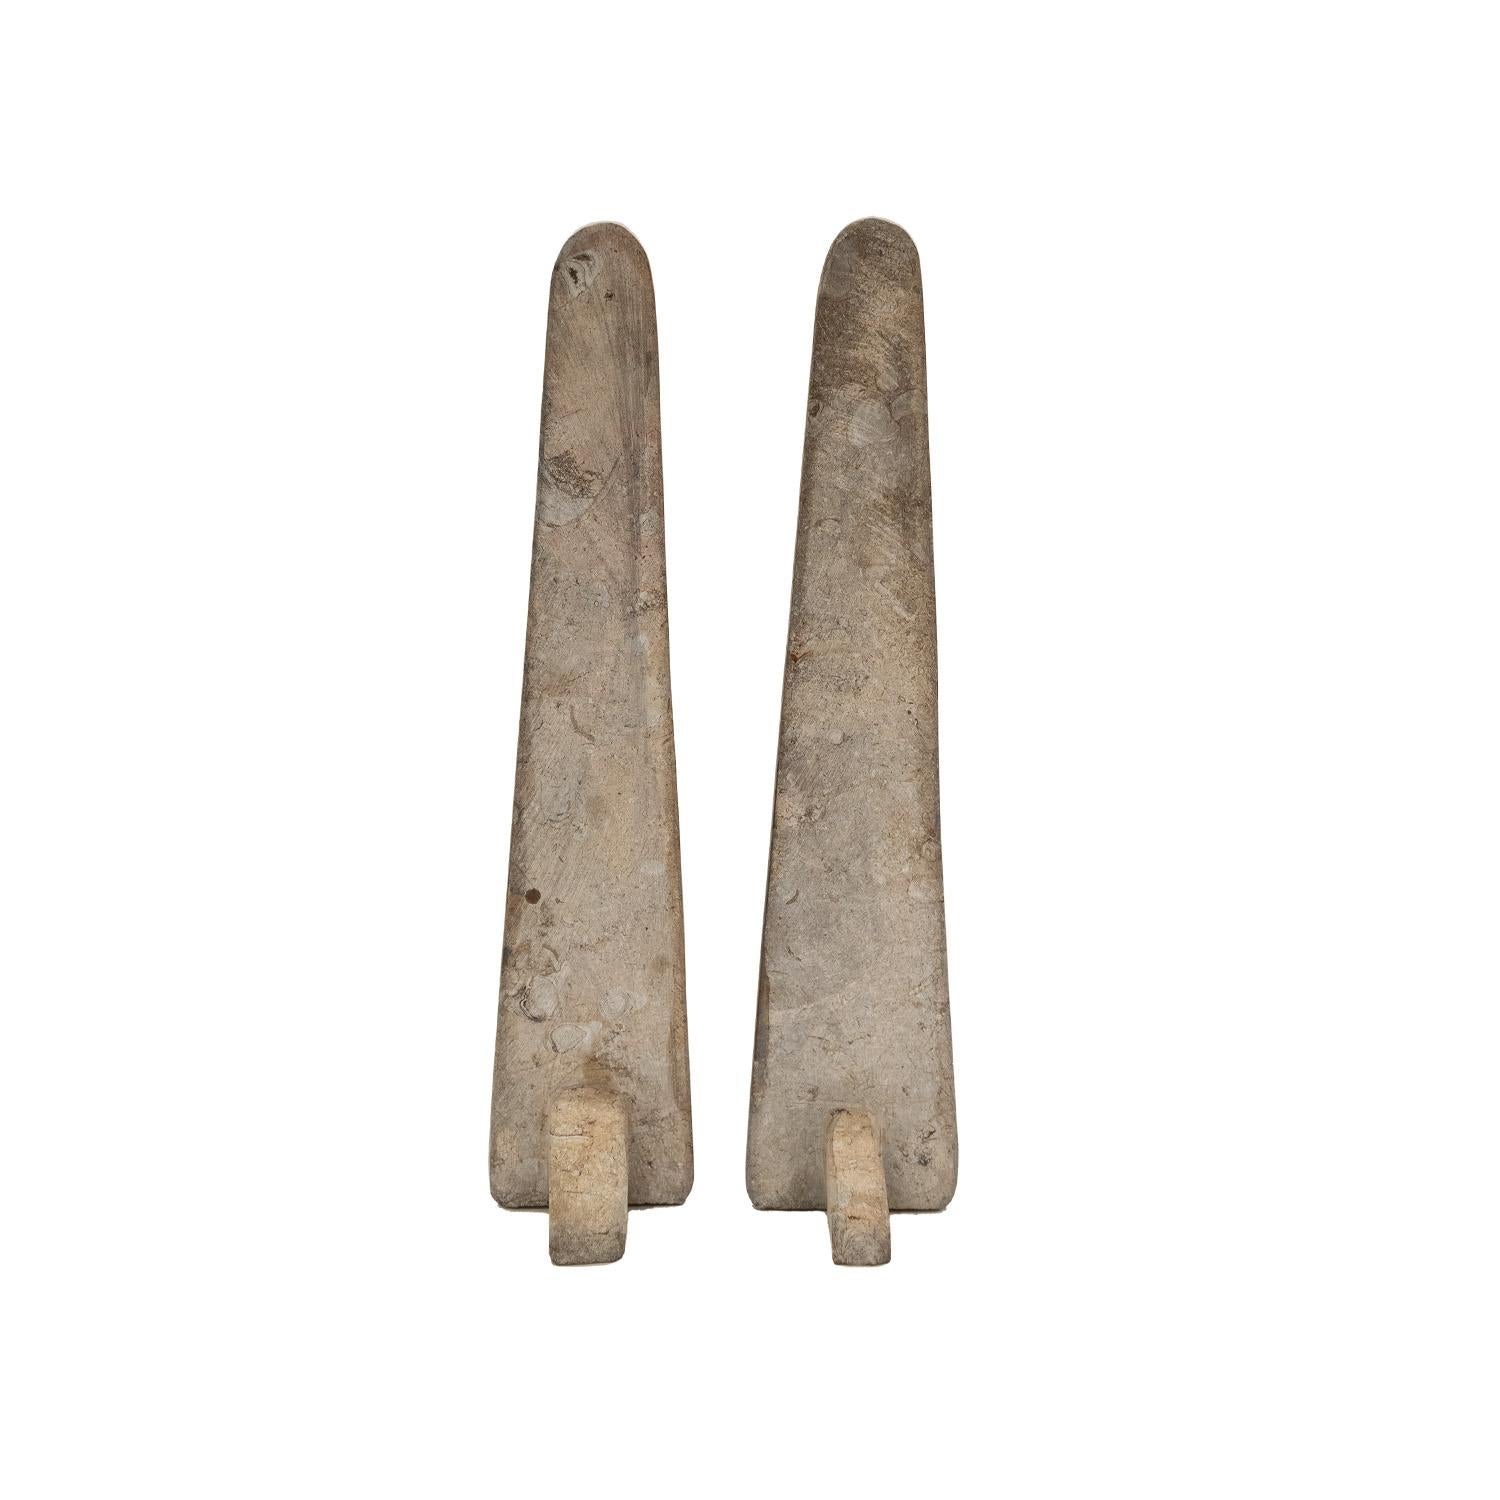 Hand-Crafted Exceptional Pair of Obelisk Shaped Fossil Sculptures 1980s For Sale